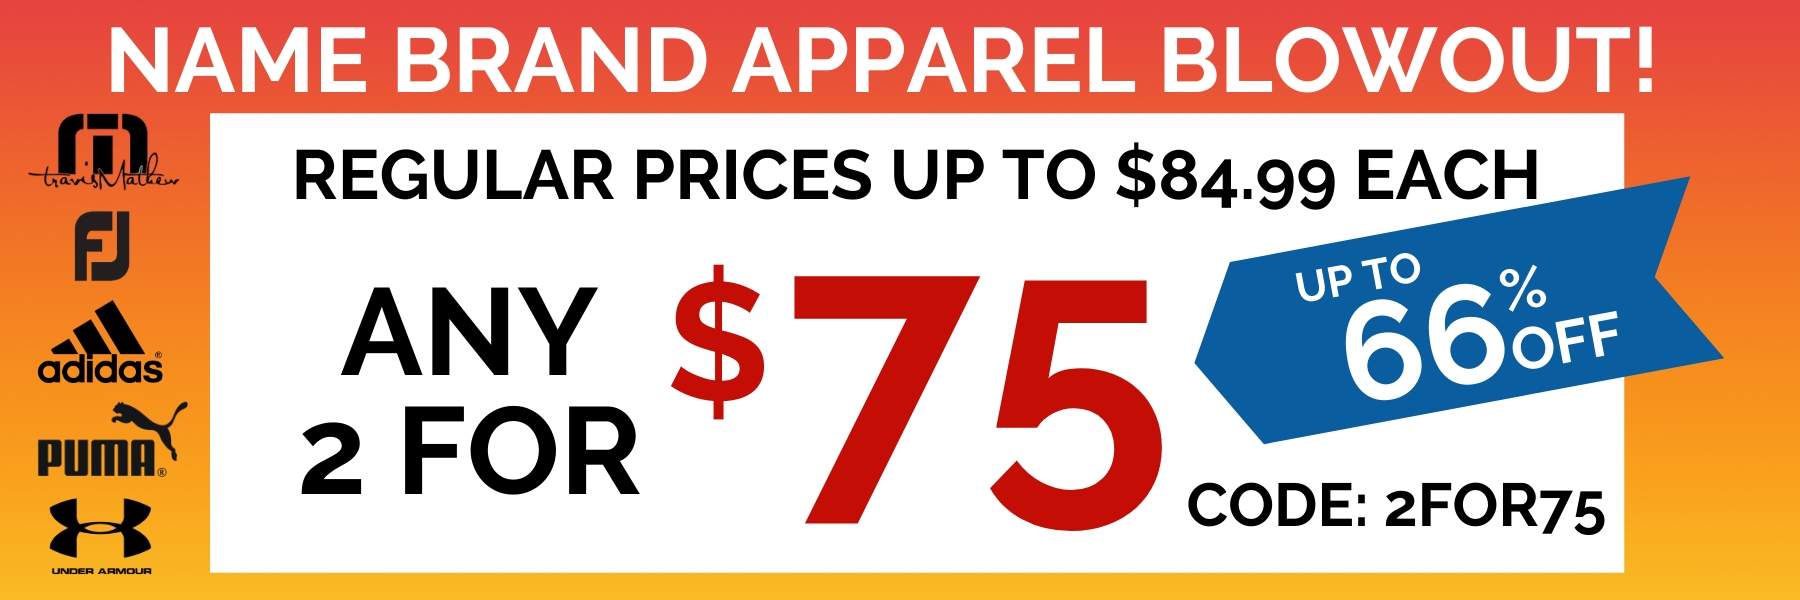 2 for $75 Apparel